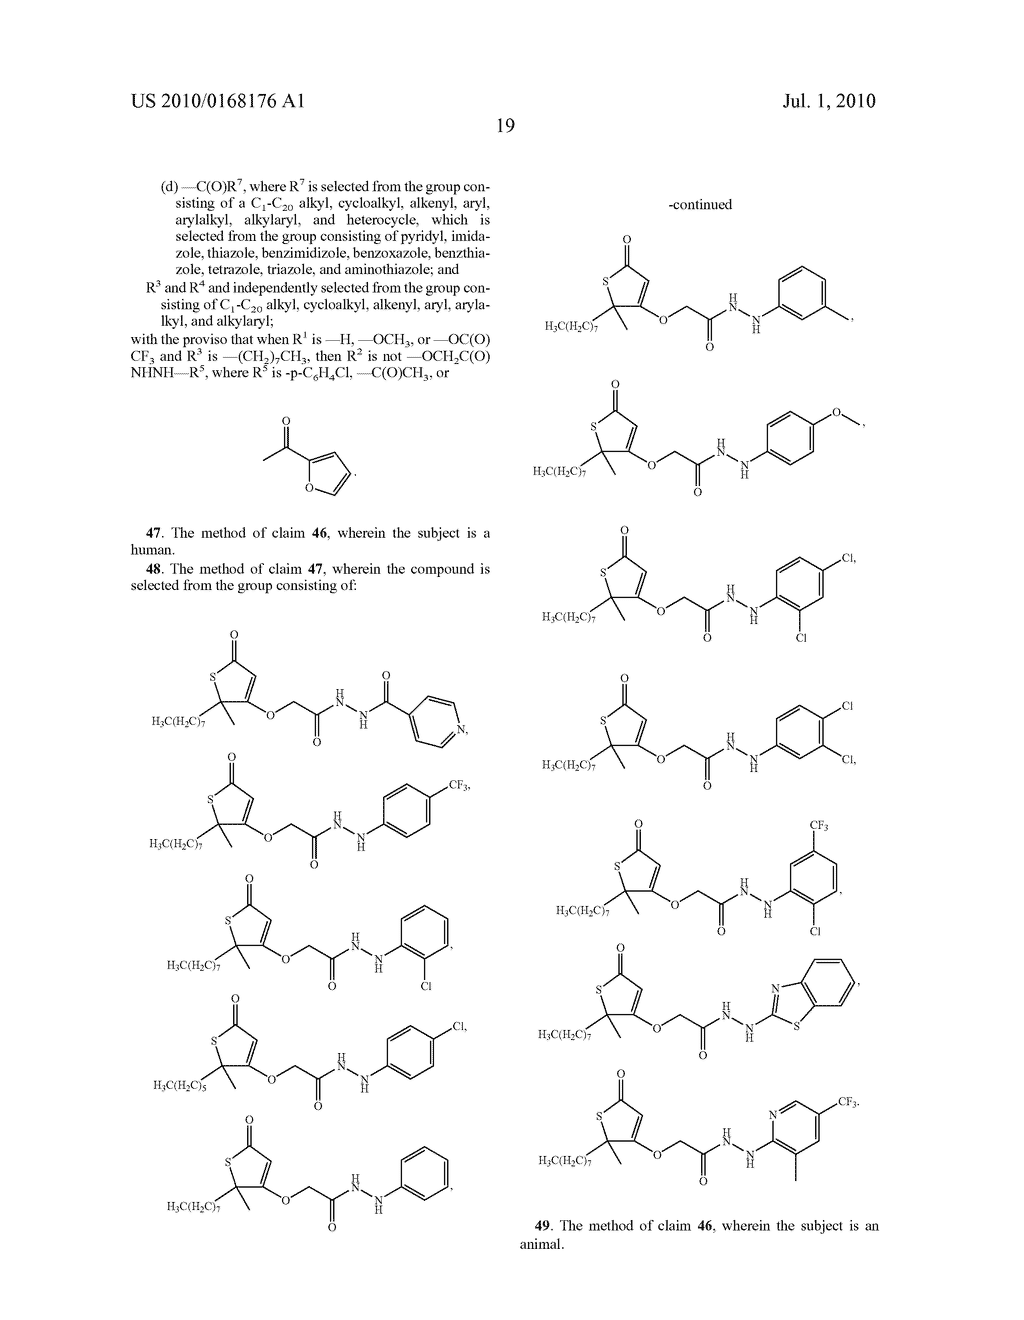 NOVEL COMPOUNDS, PHARMACEUTICAL COMPOSITIONS CONTAINING SAME, AND METHODS OF USE FOR SAME - diagram, schematic, and image 23